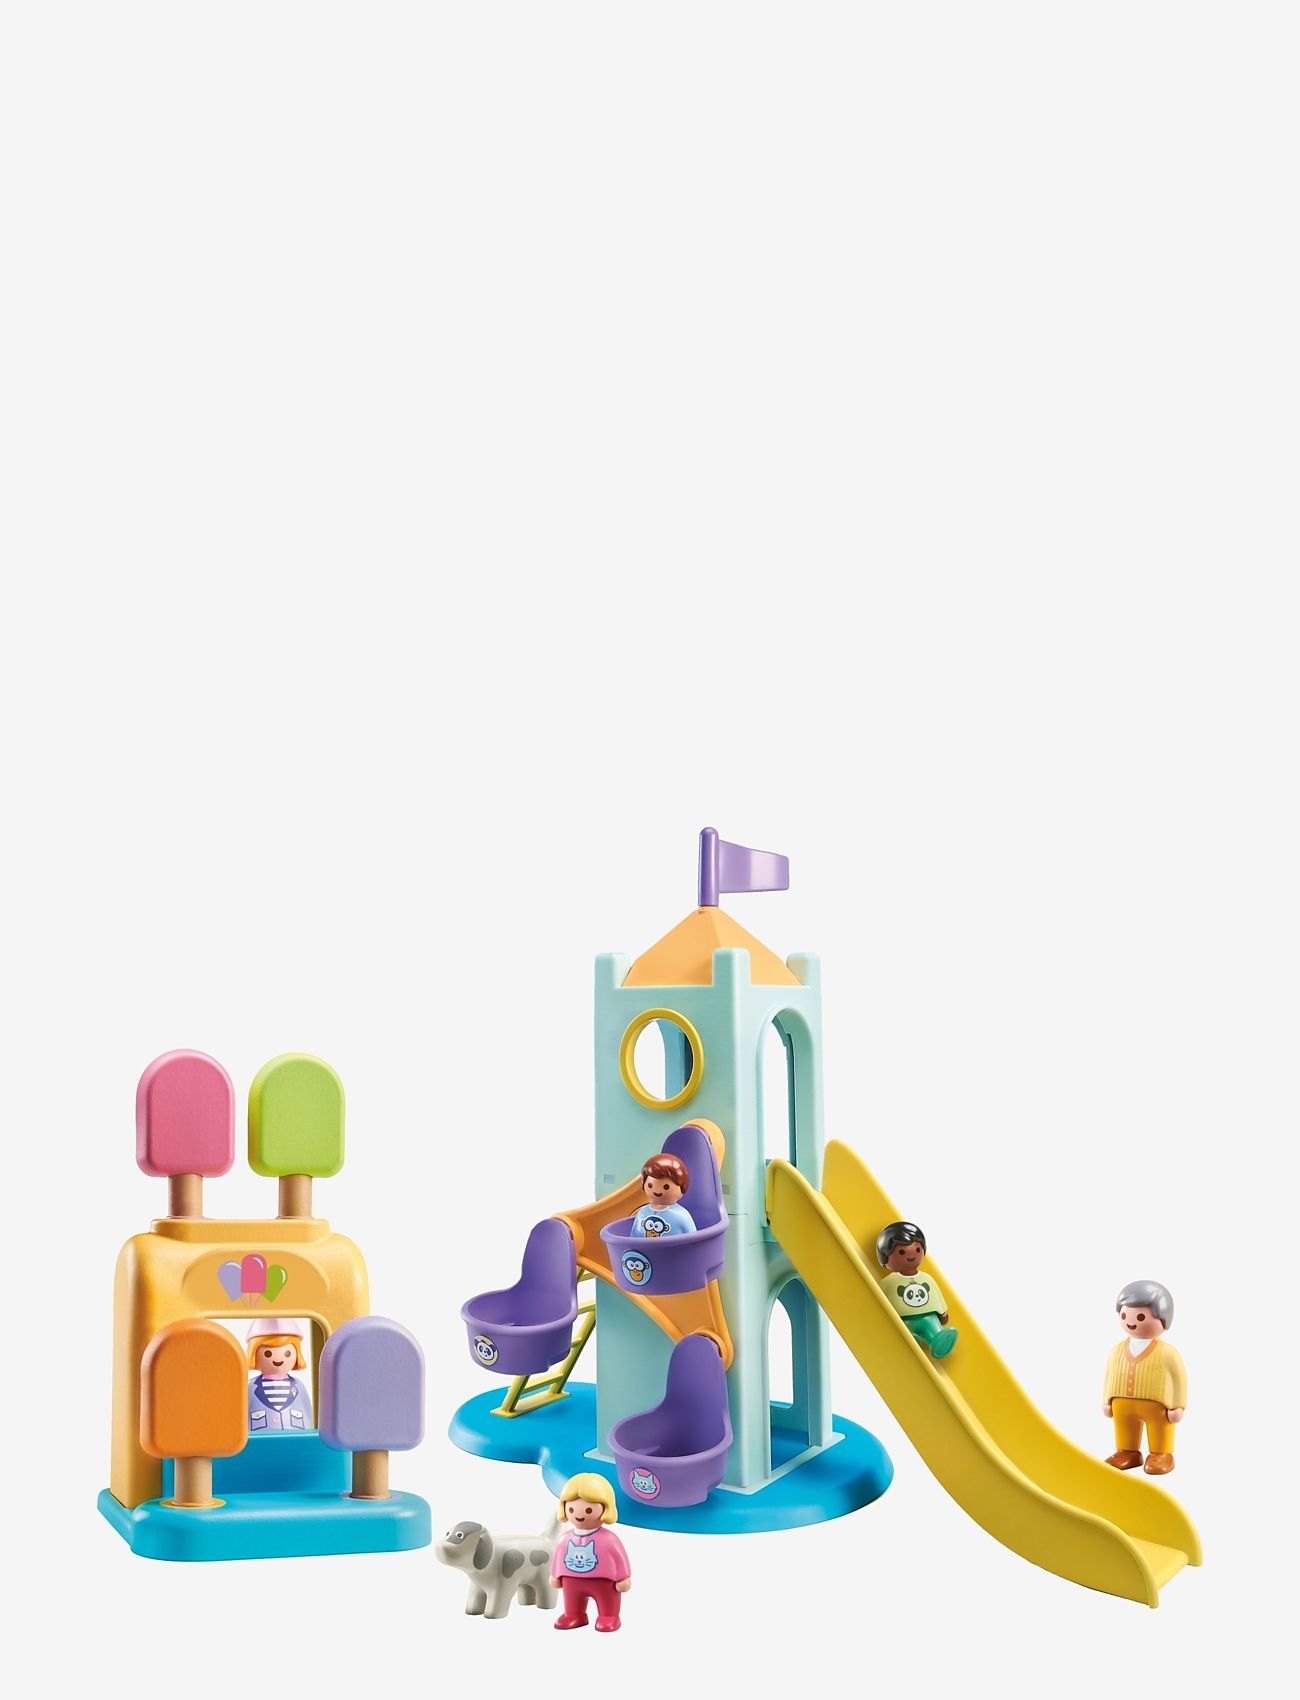 PLAYMOBIL - PLAYMOBIL 1.2.3: Adventure Tower with Ice Cream Booth - 71326 - playmobil 1.2.3 - multicolored - 1